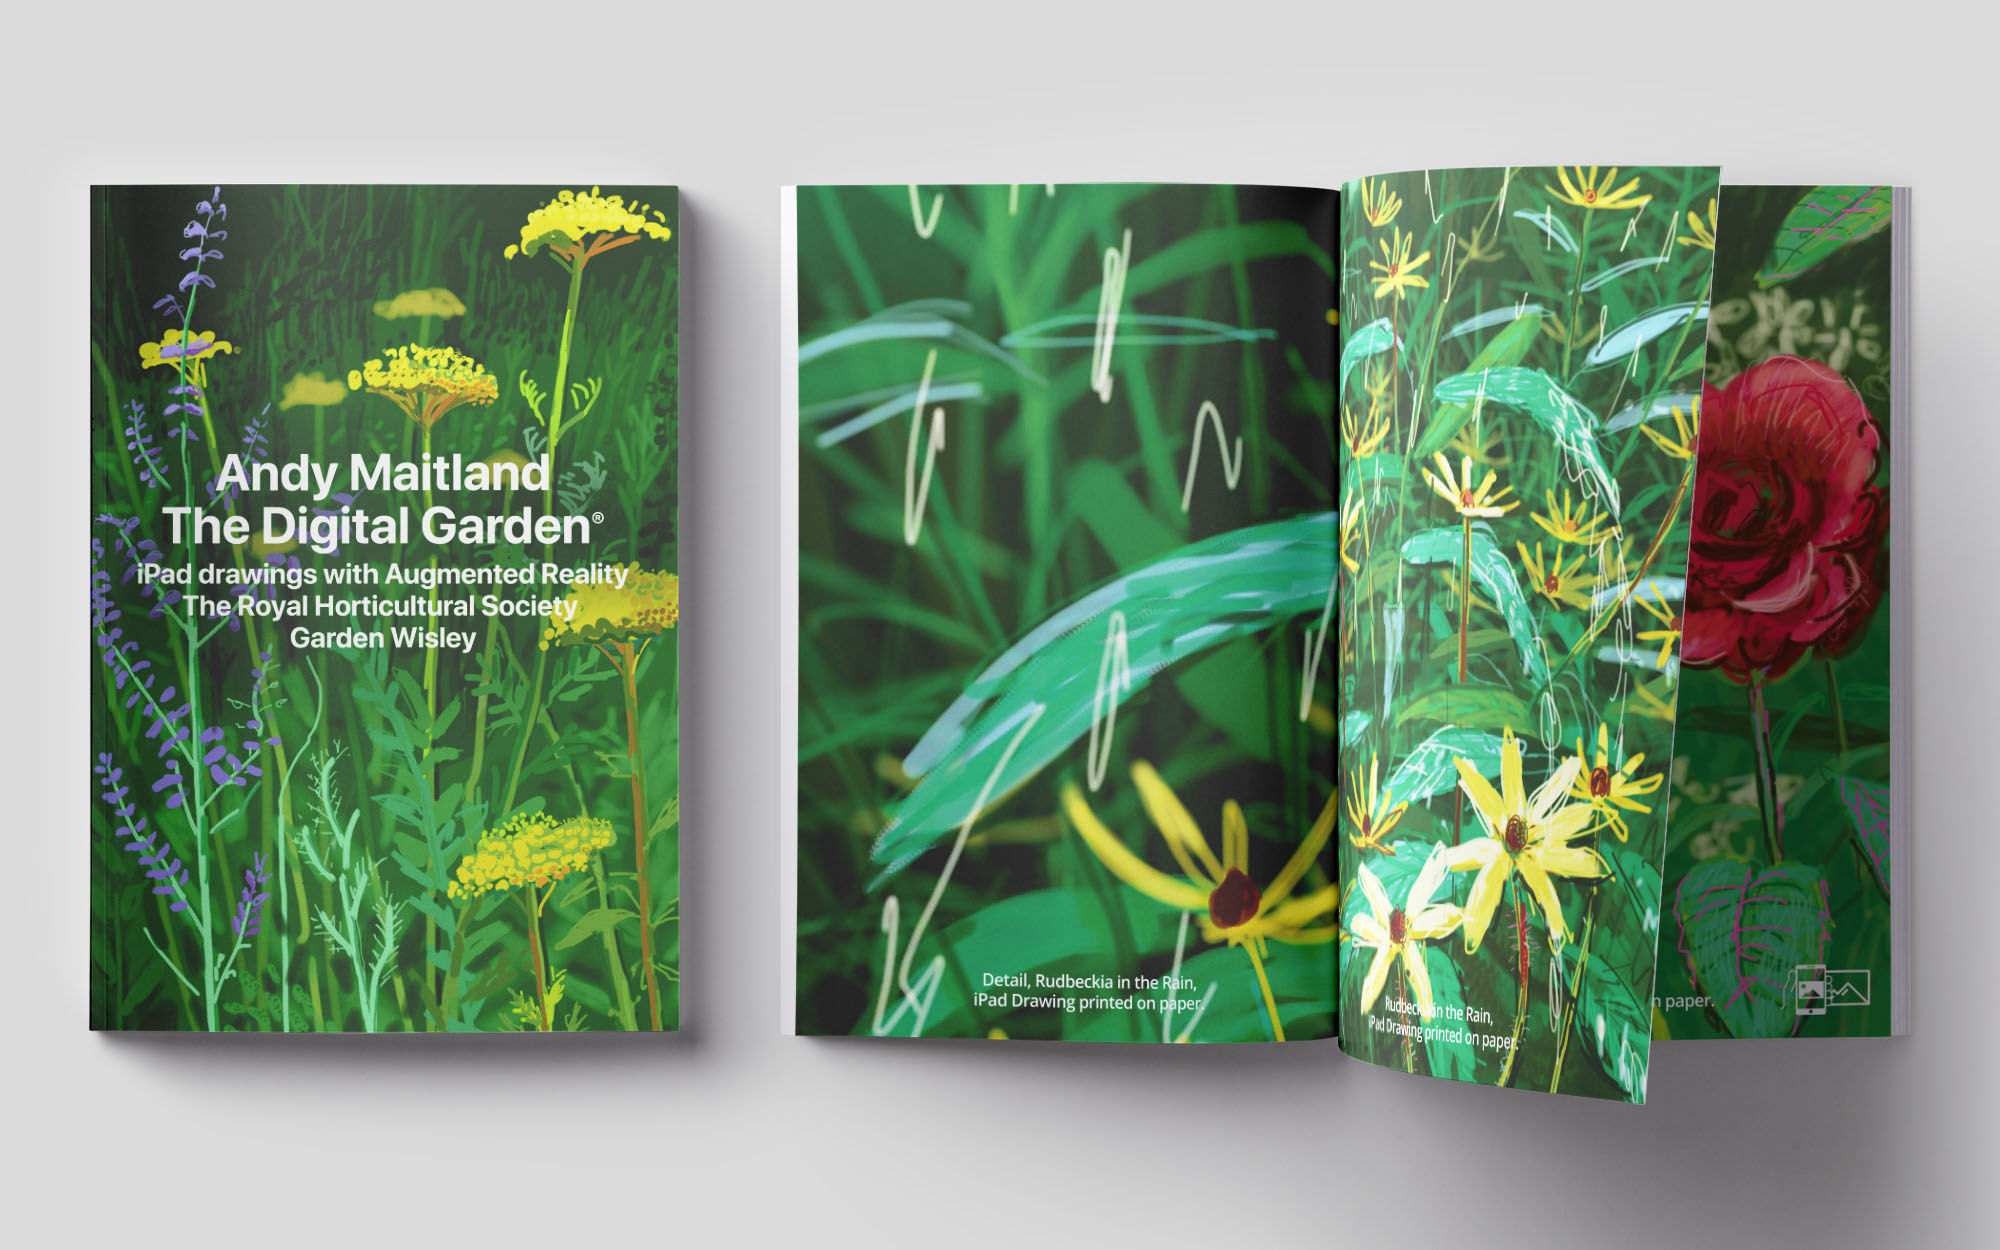 Publication - The Digital Garden® 2018, iPad drawings with Augmented Reality, Royal Horticultural Society, exhibition book, English edition.